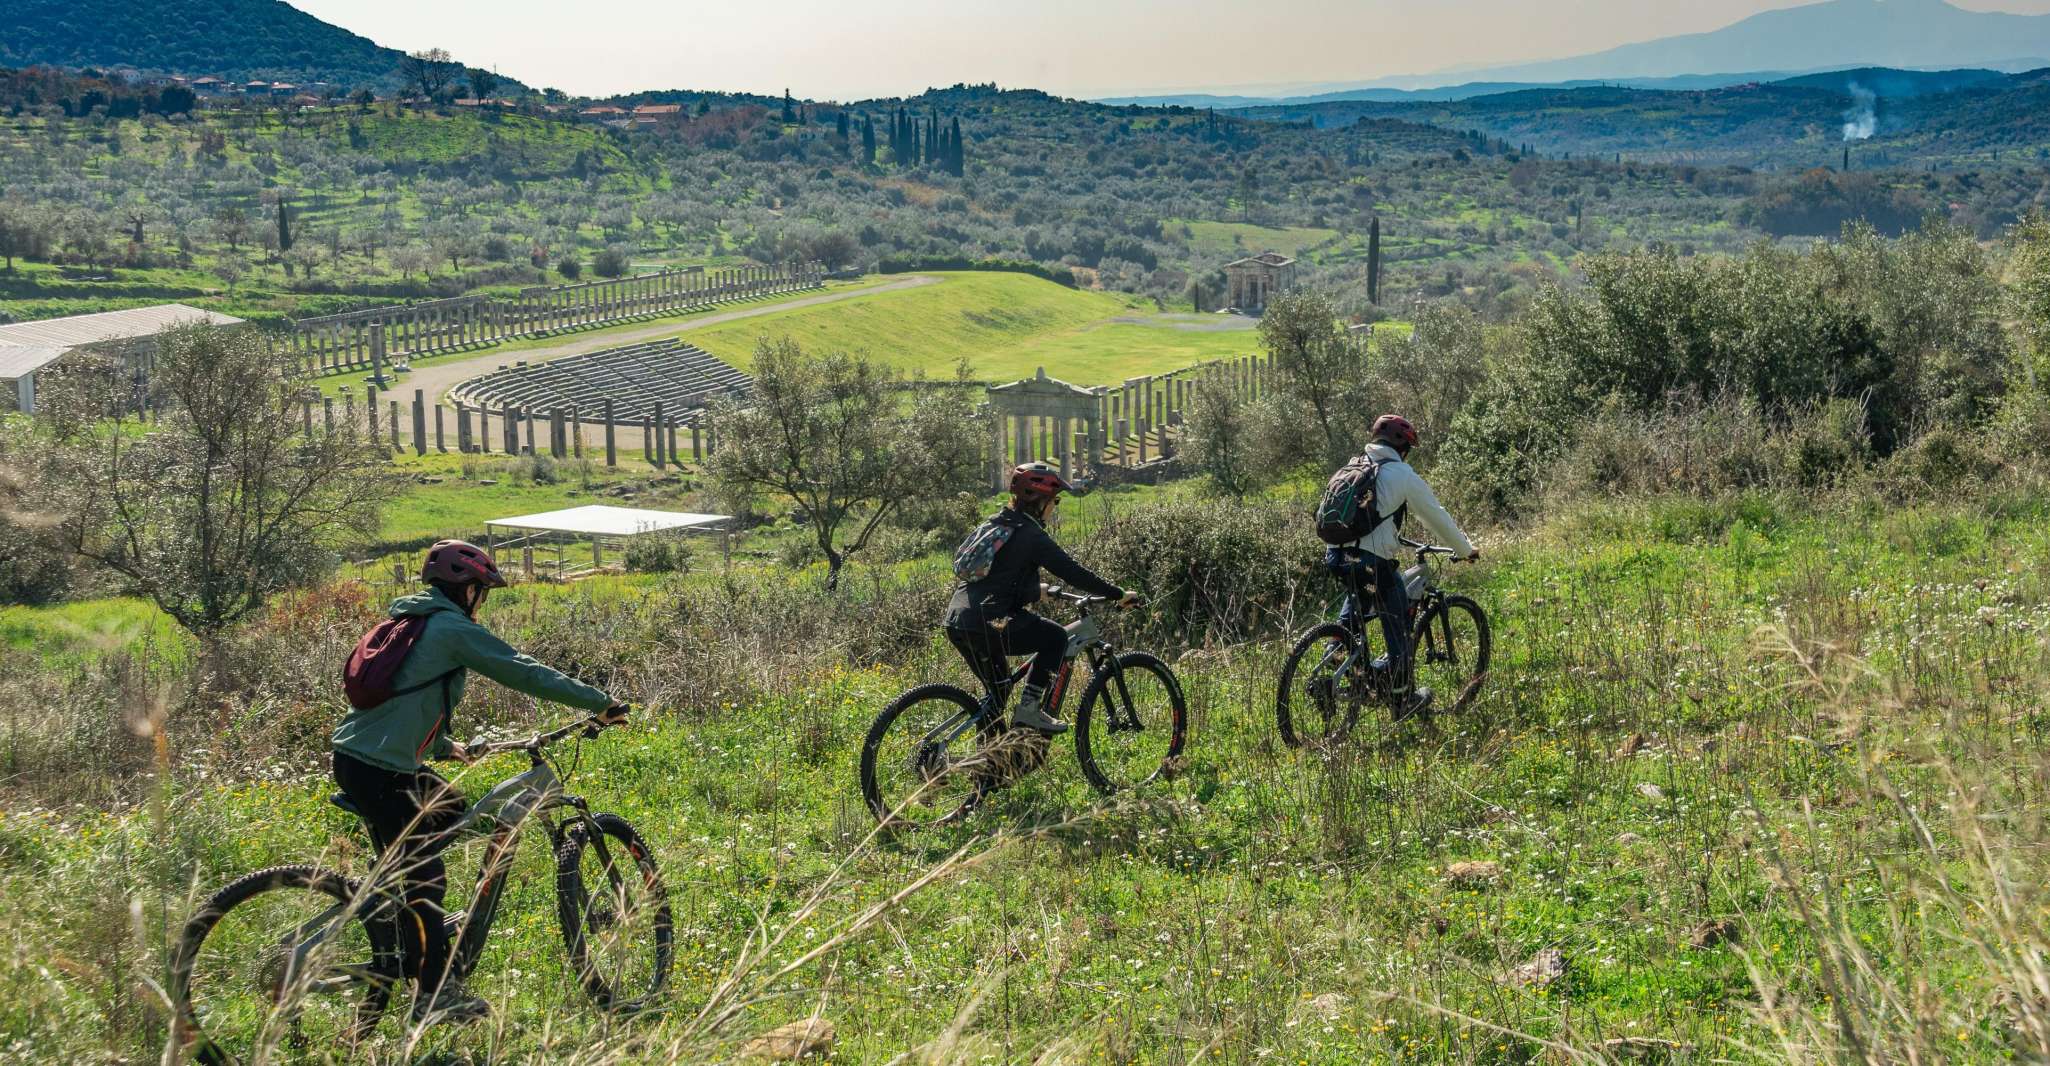 Ancient Messene, E-Bike Tour with Monastery Visit and Picnic - Housity